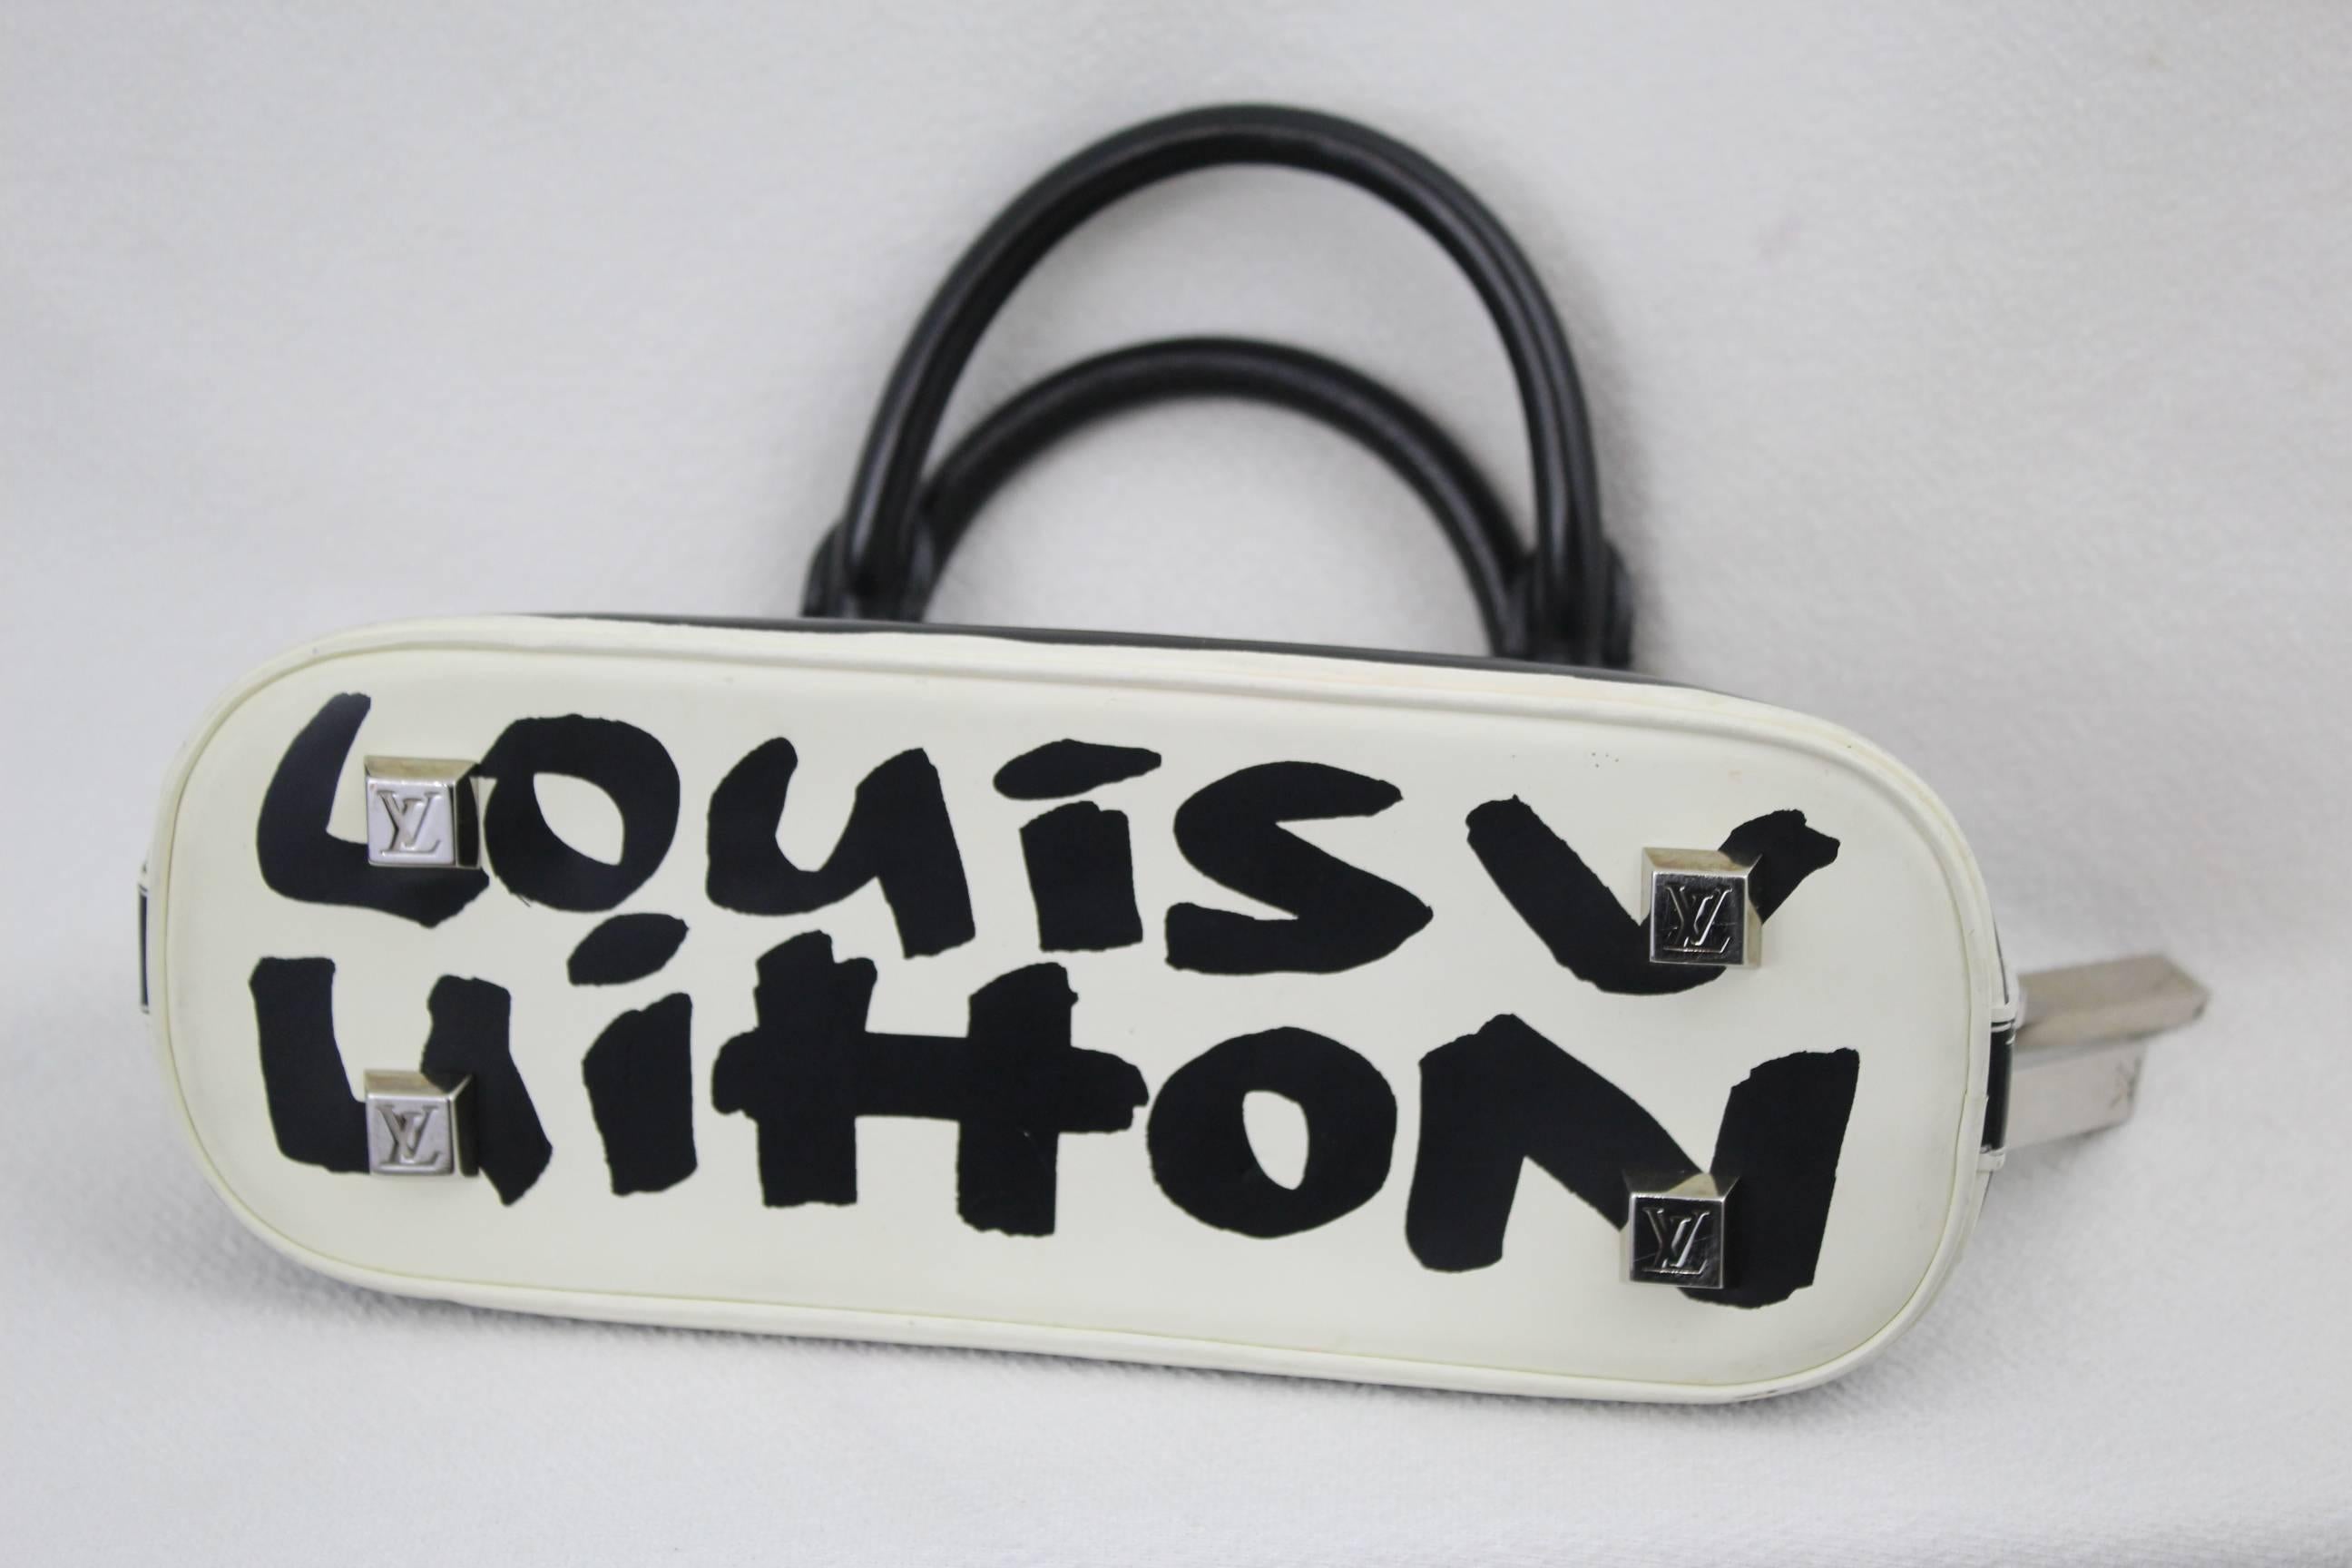 Lovely mini Alma horizontal Louis Vuitton bag in black and white deisgn.
From the graffiti collectio of the collabpration between Marc Jacobs and Stephen Sprousse

Good condiiton but the bab has been used so it presents some signs of wear

Sold with